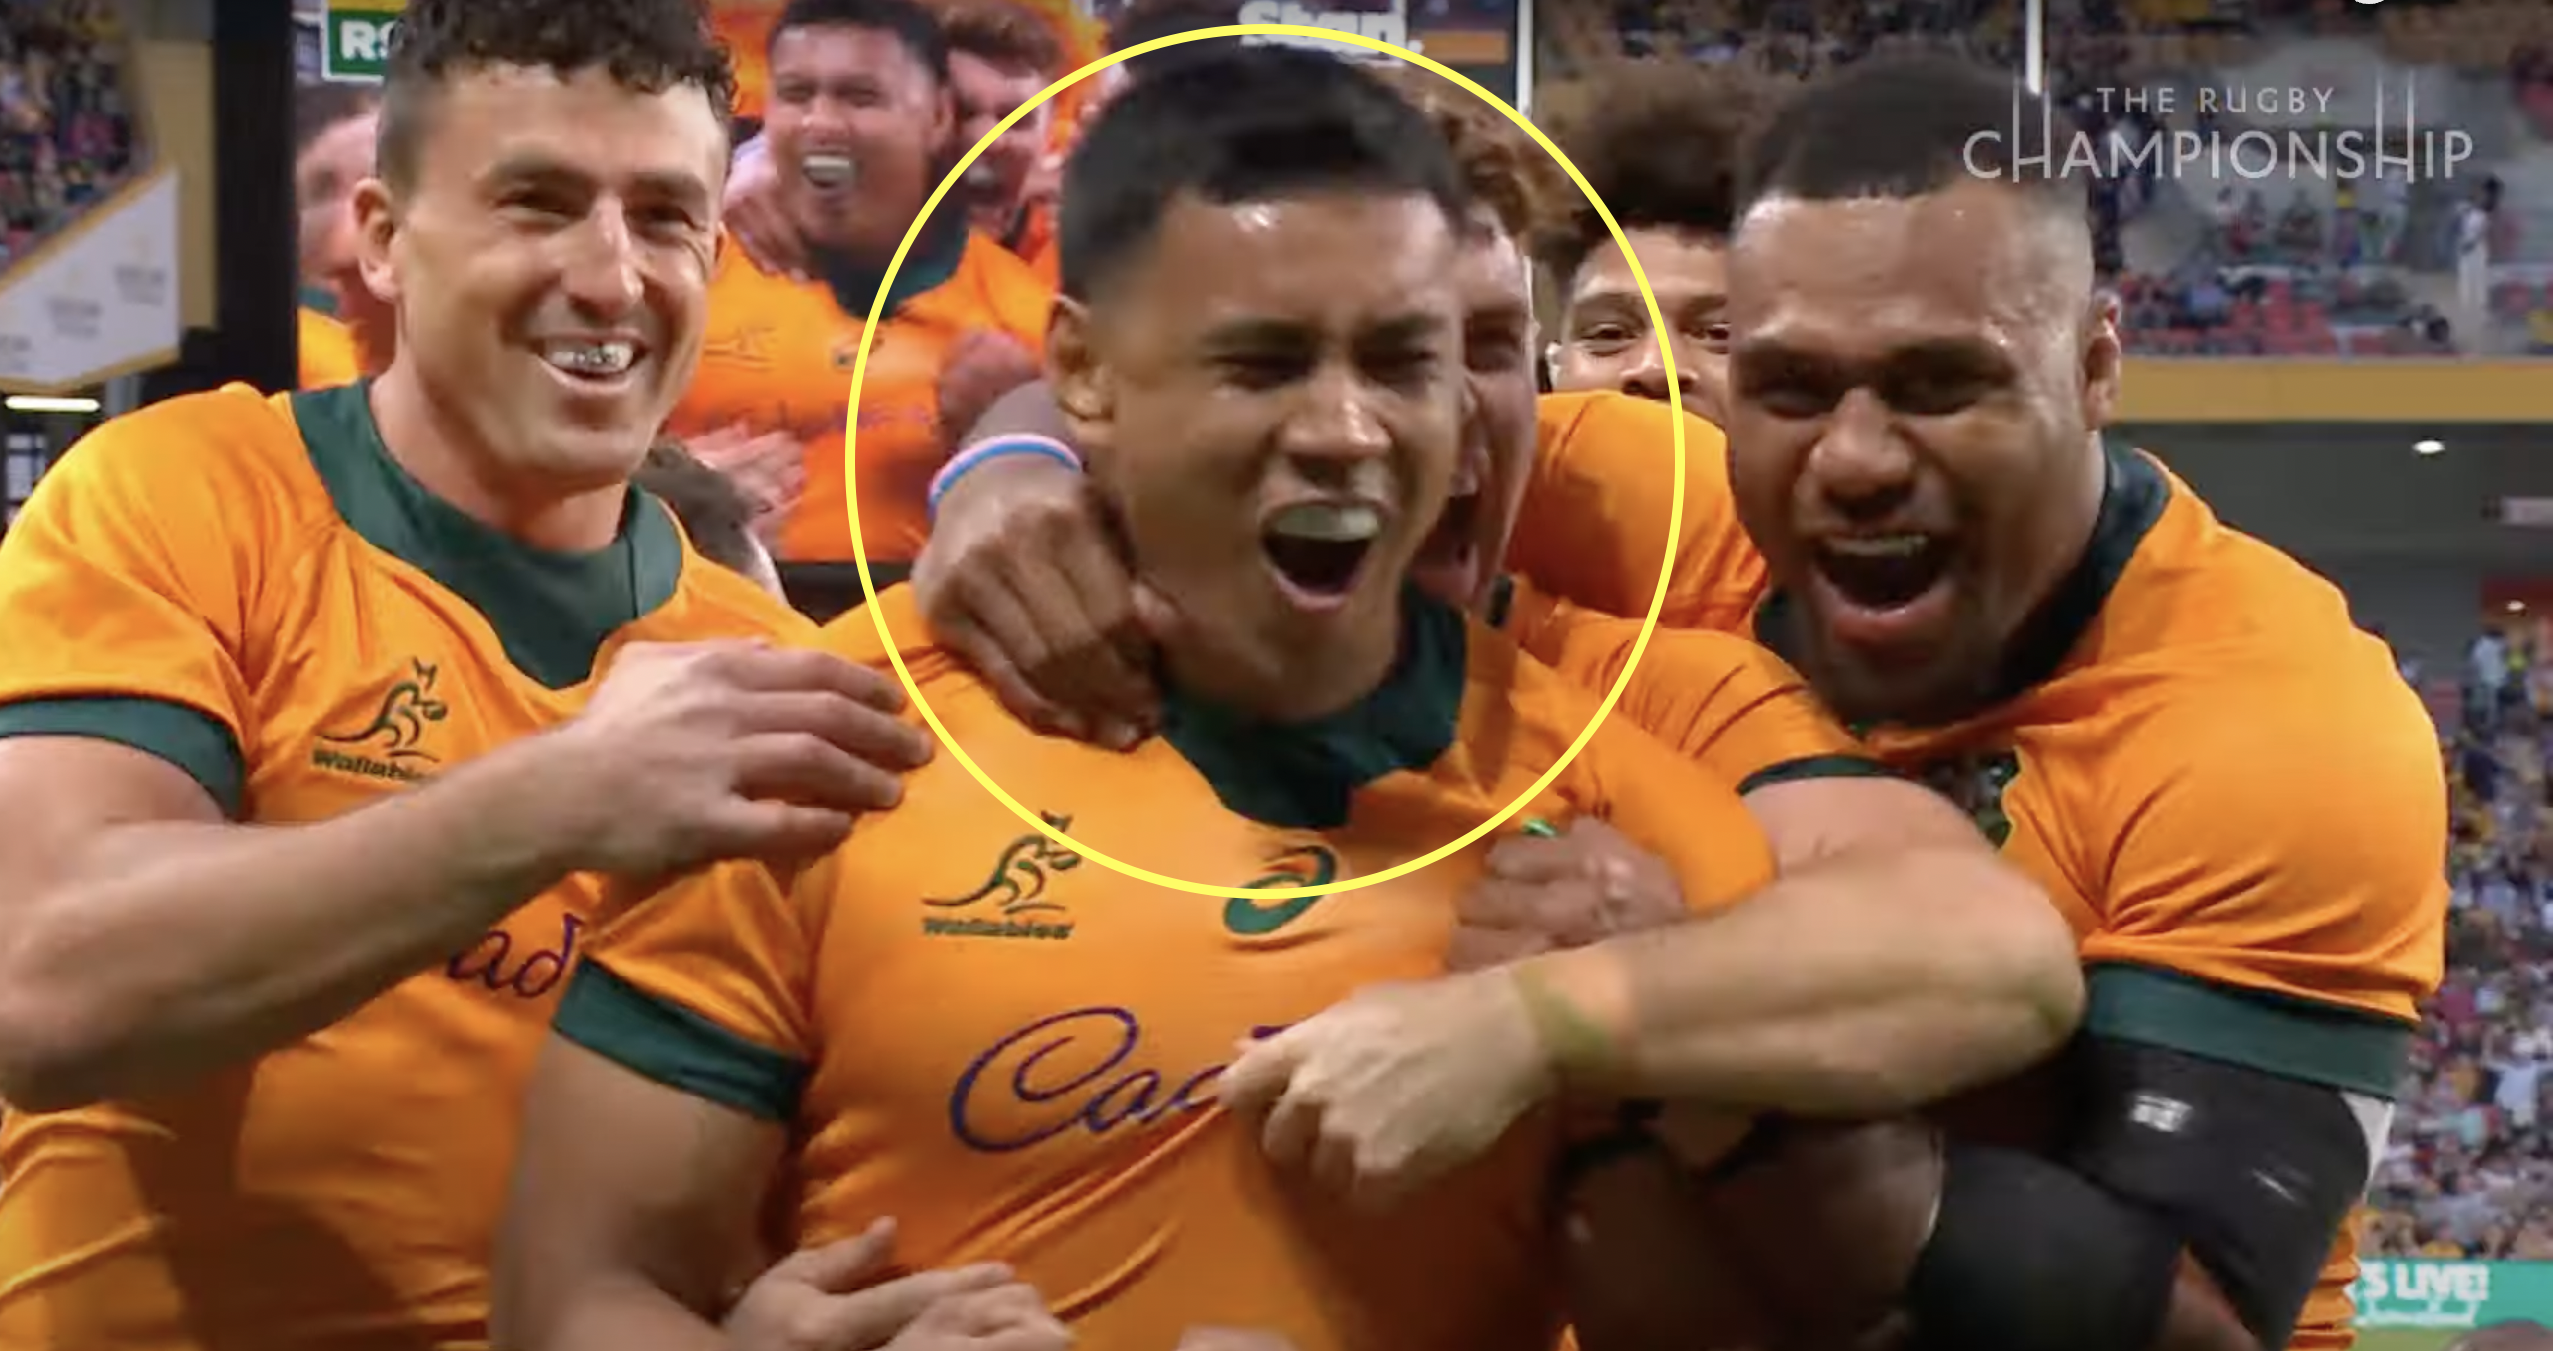 Samu Kerevi called out by Wallabies teammate online